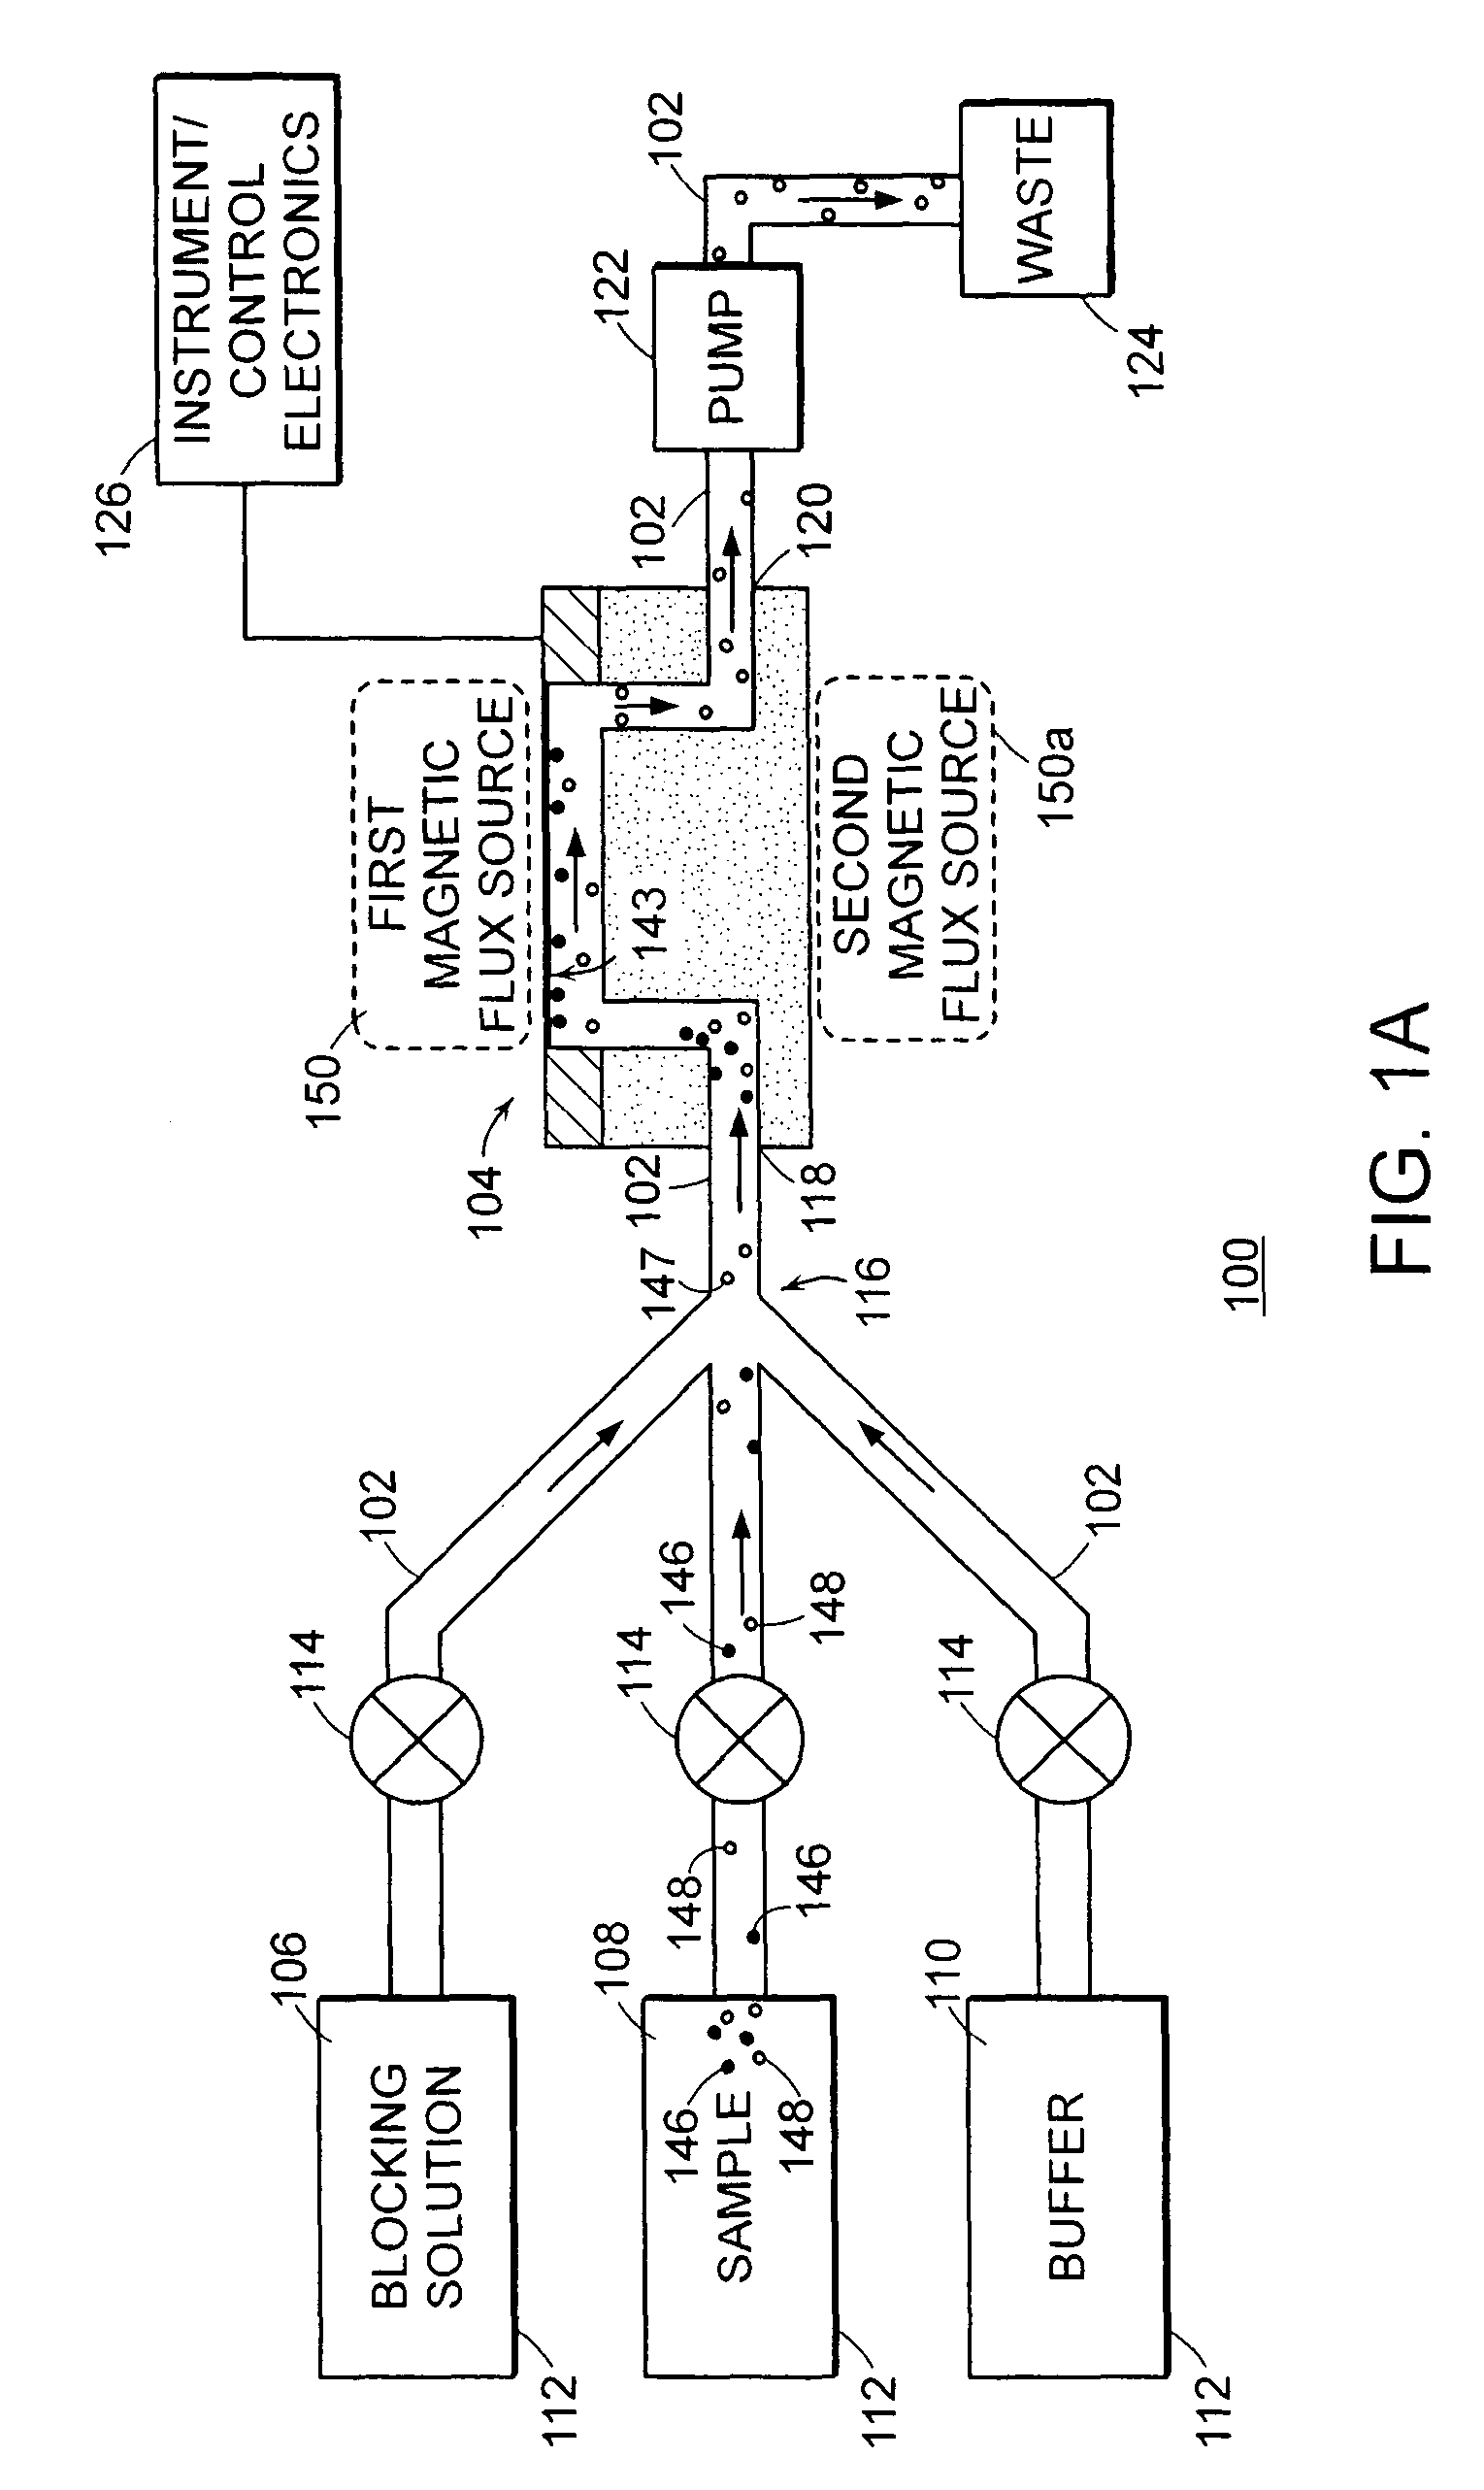 Method and apparatus for analyzing bioprocess fluids